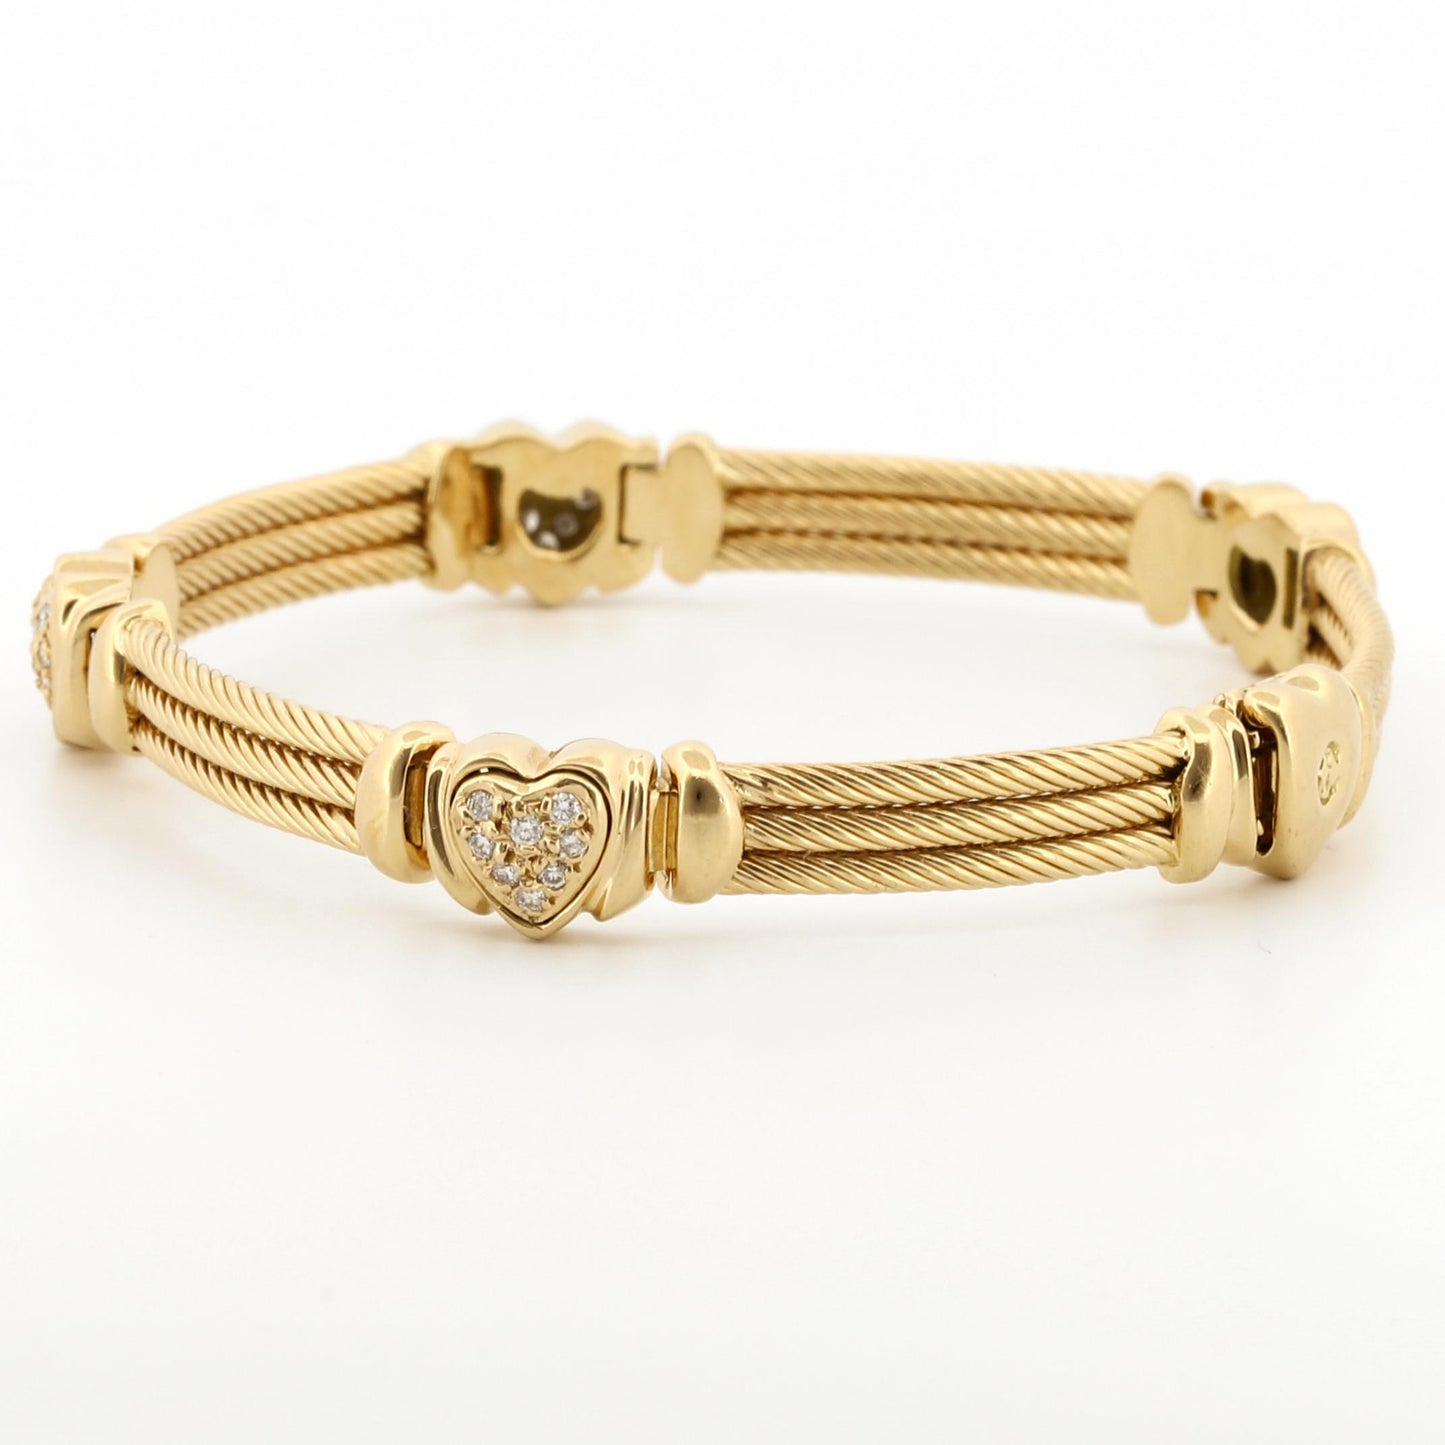 Philippe Charriol Pave Diamond Heart Station Bracelet in 18k Yellow Gold